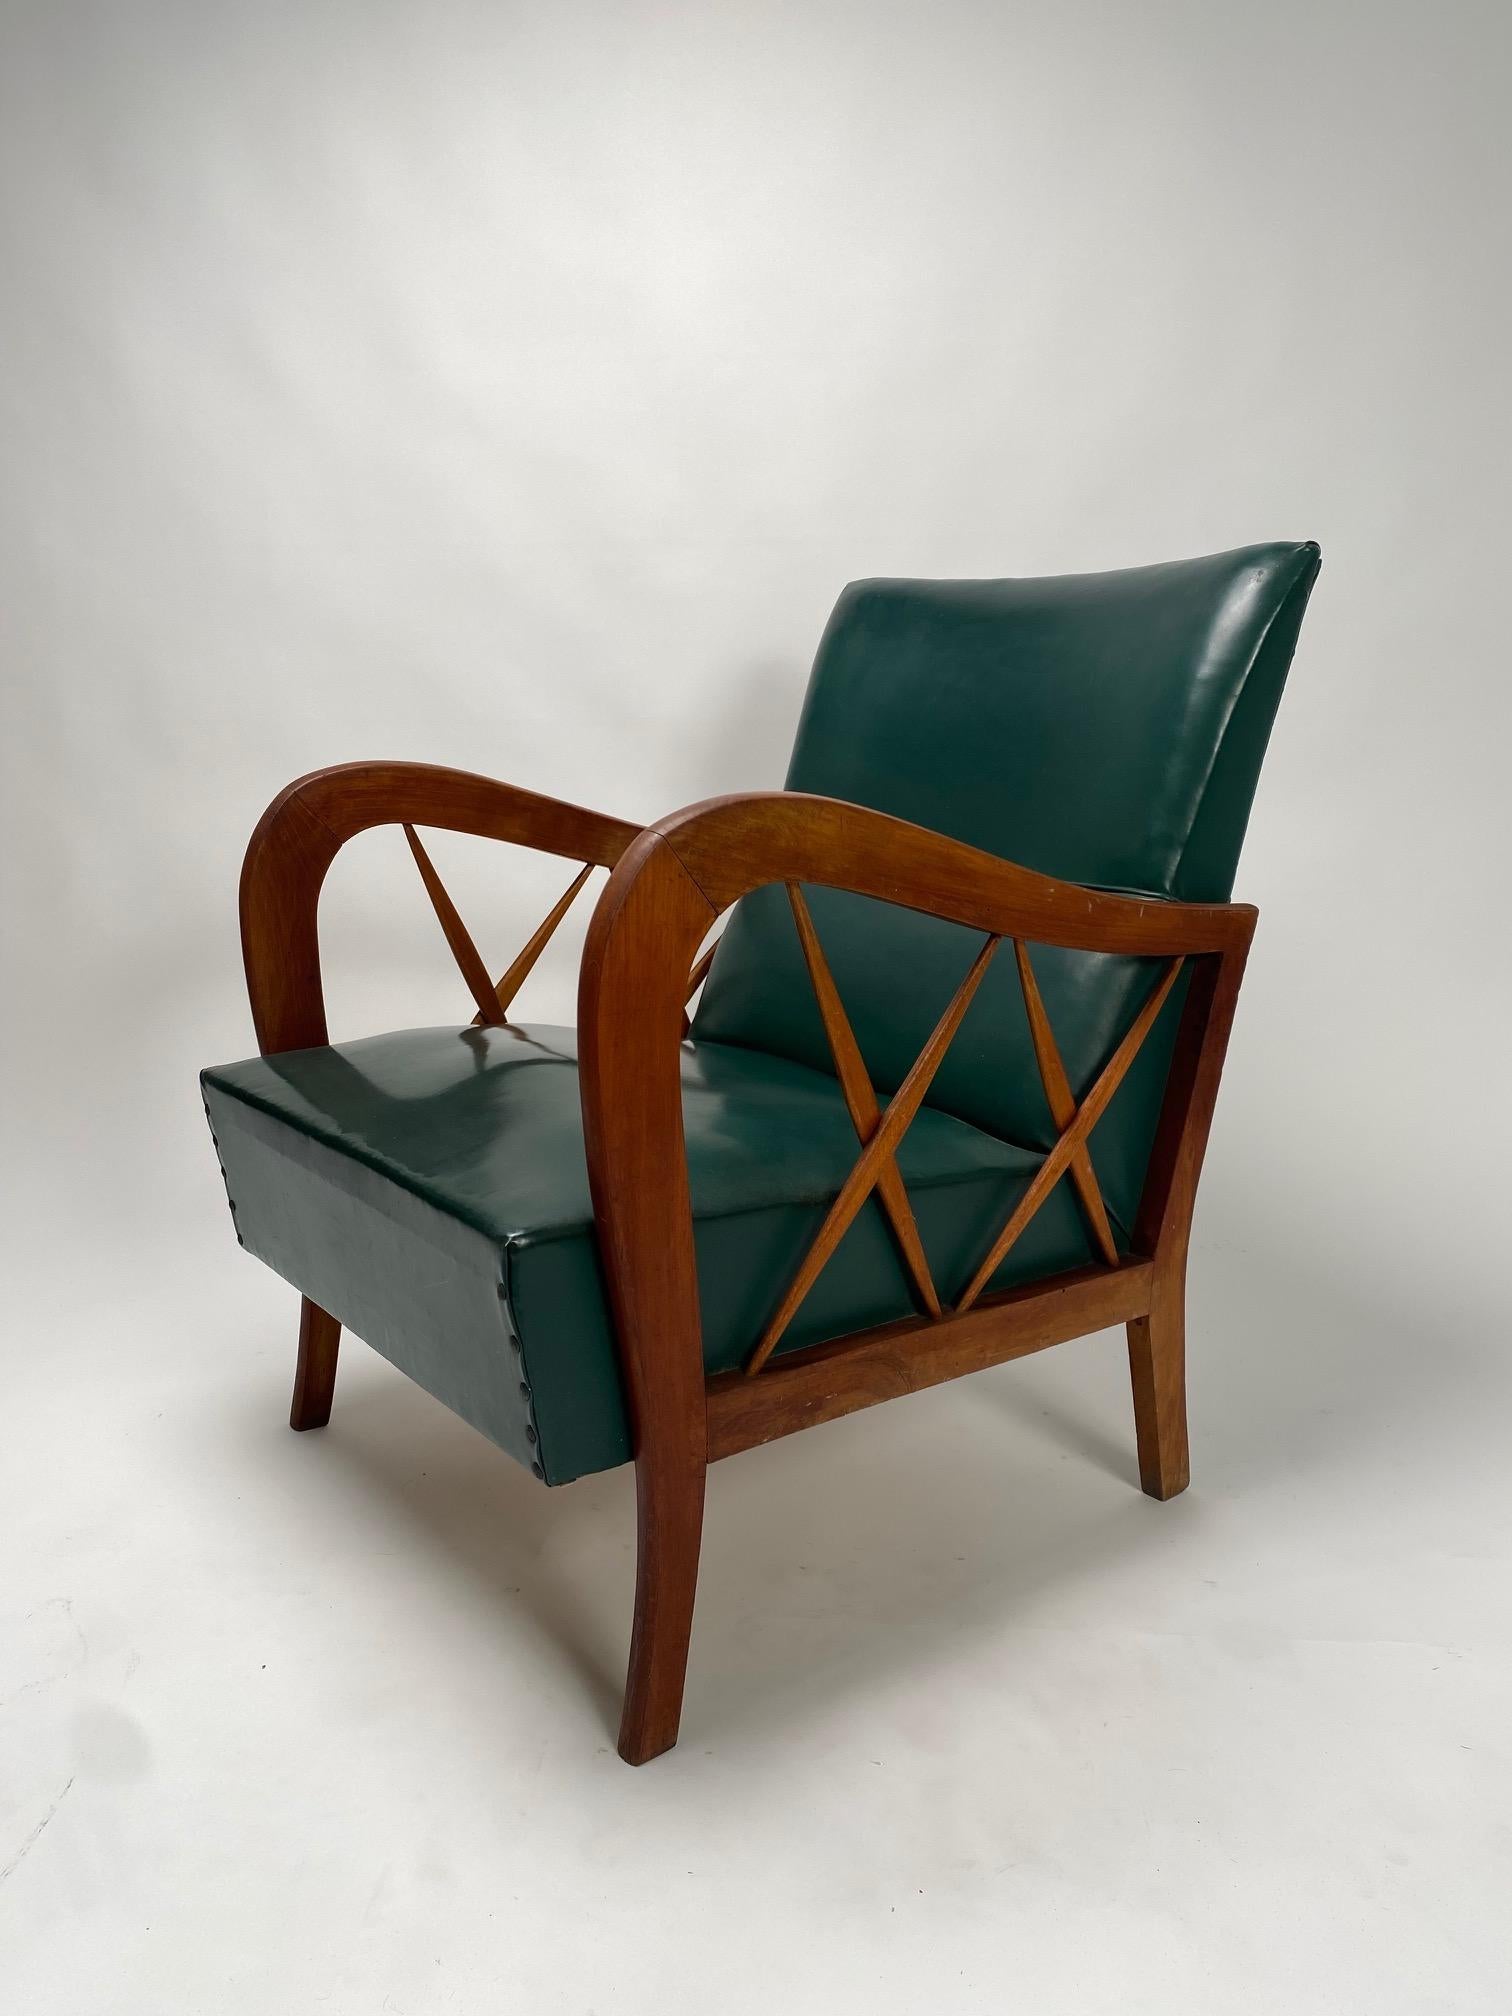 Pair of solid wood armchairs attributable to Paolo Buffa, Italy, 1950s (Customizable)

The two armchairs feature a solid wooden structure with the classic 